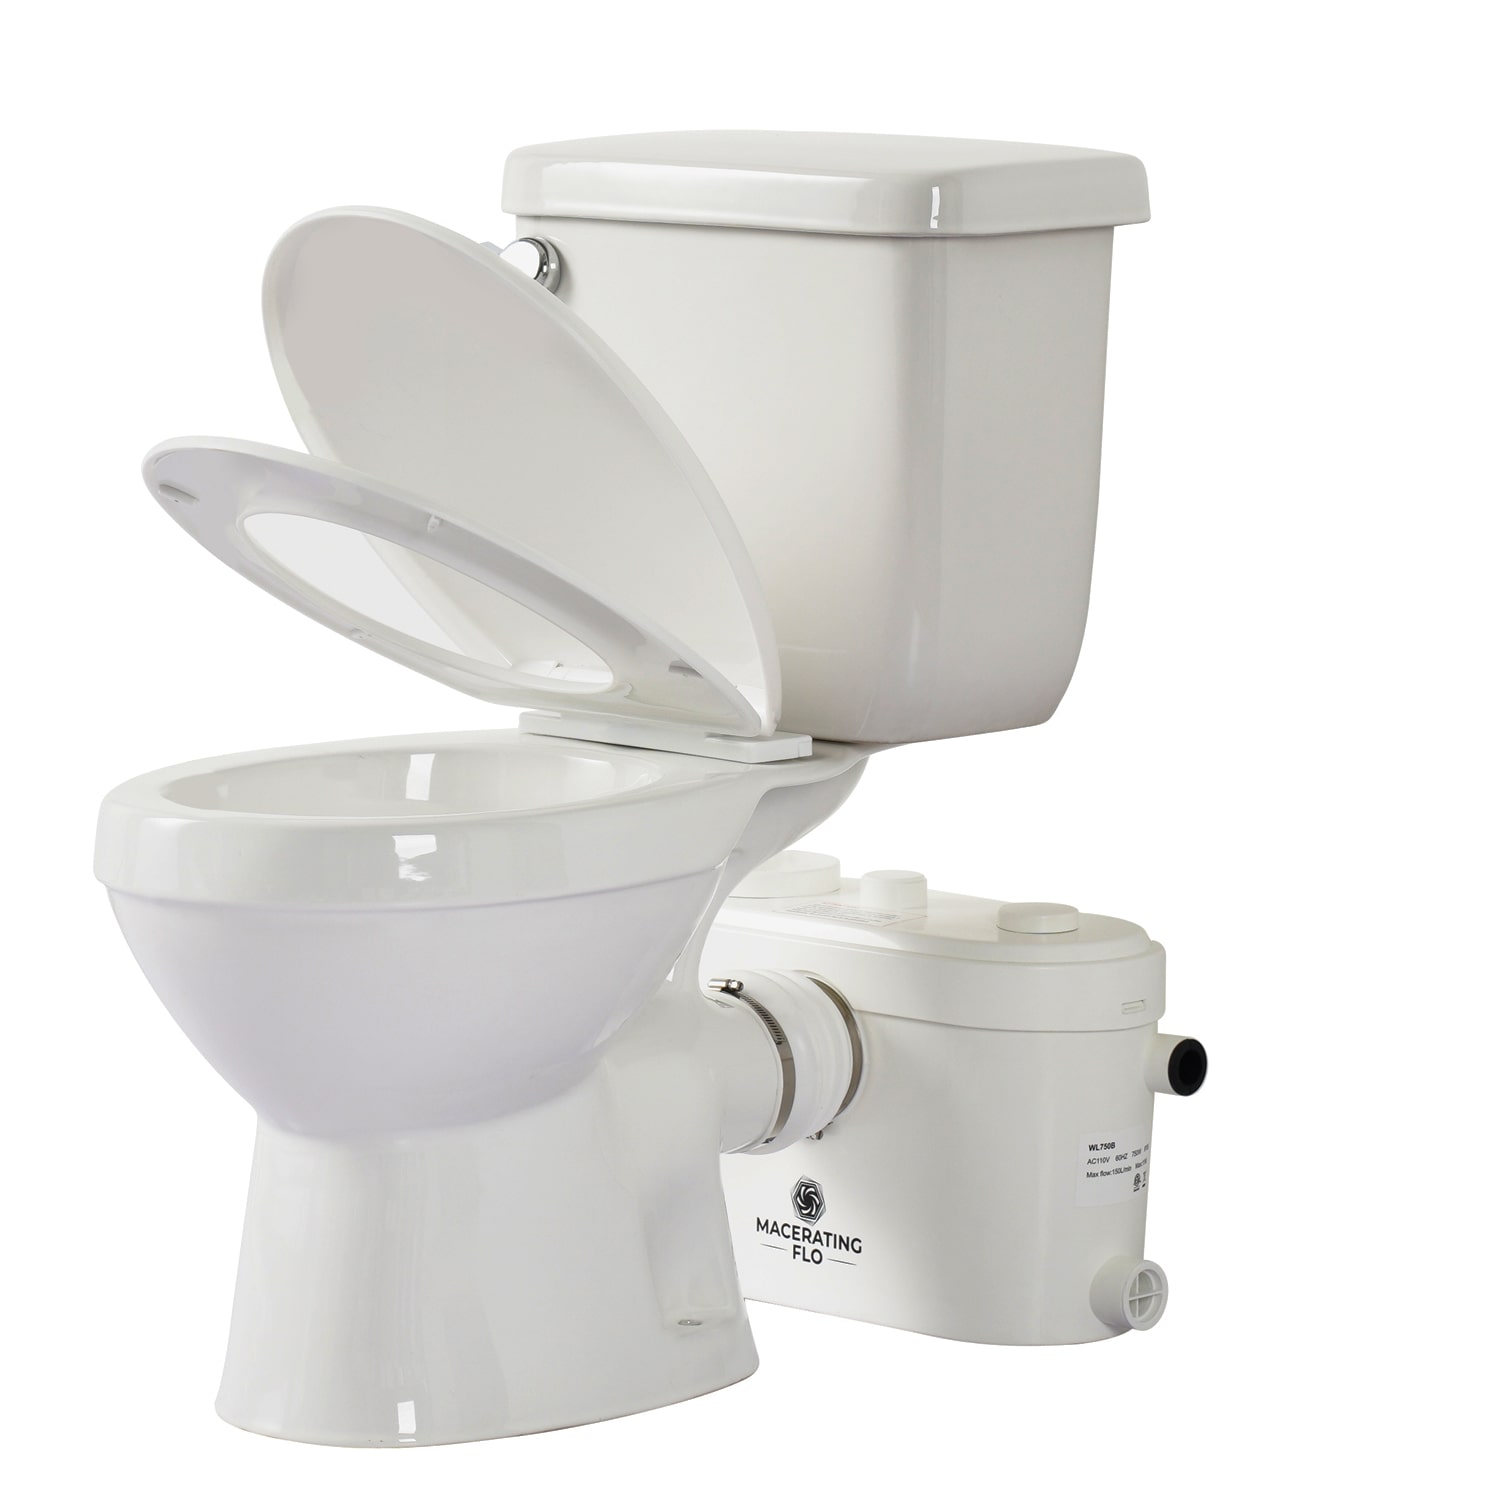 Why Do You Need a Macerator Toilet?